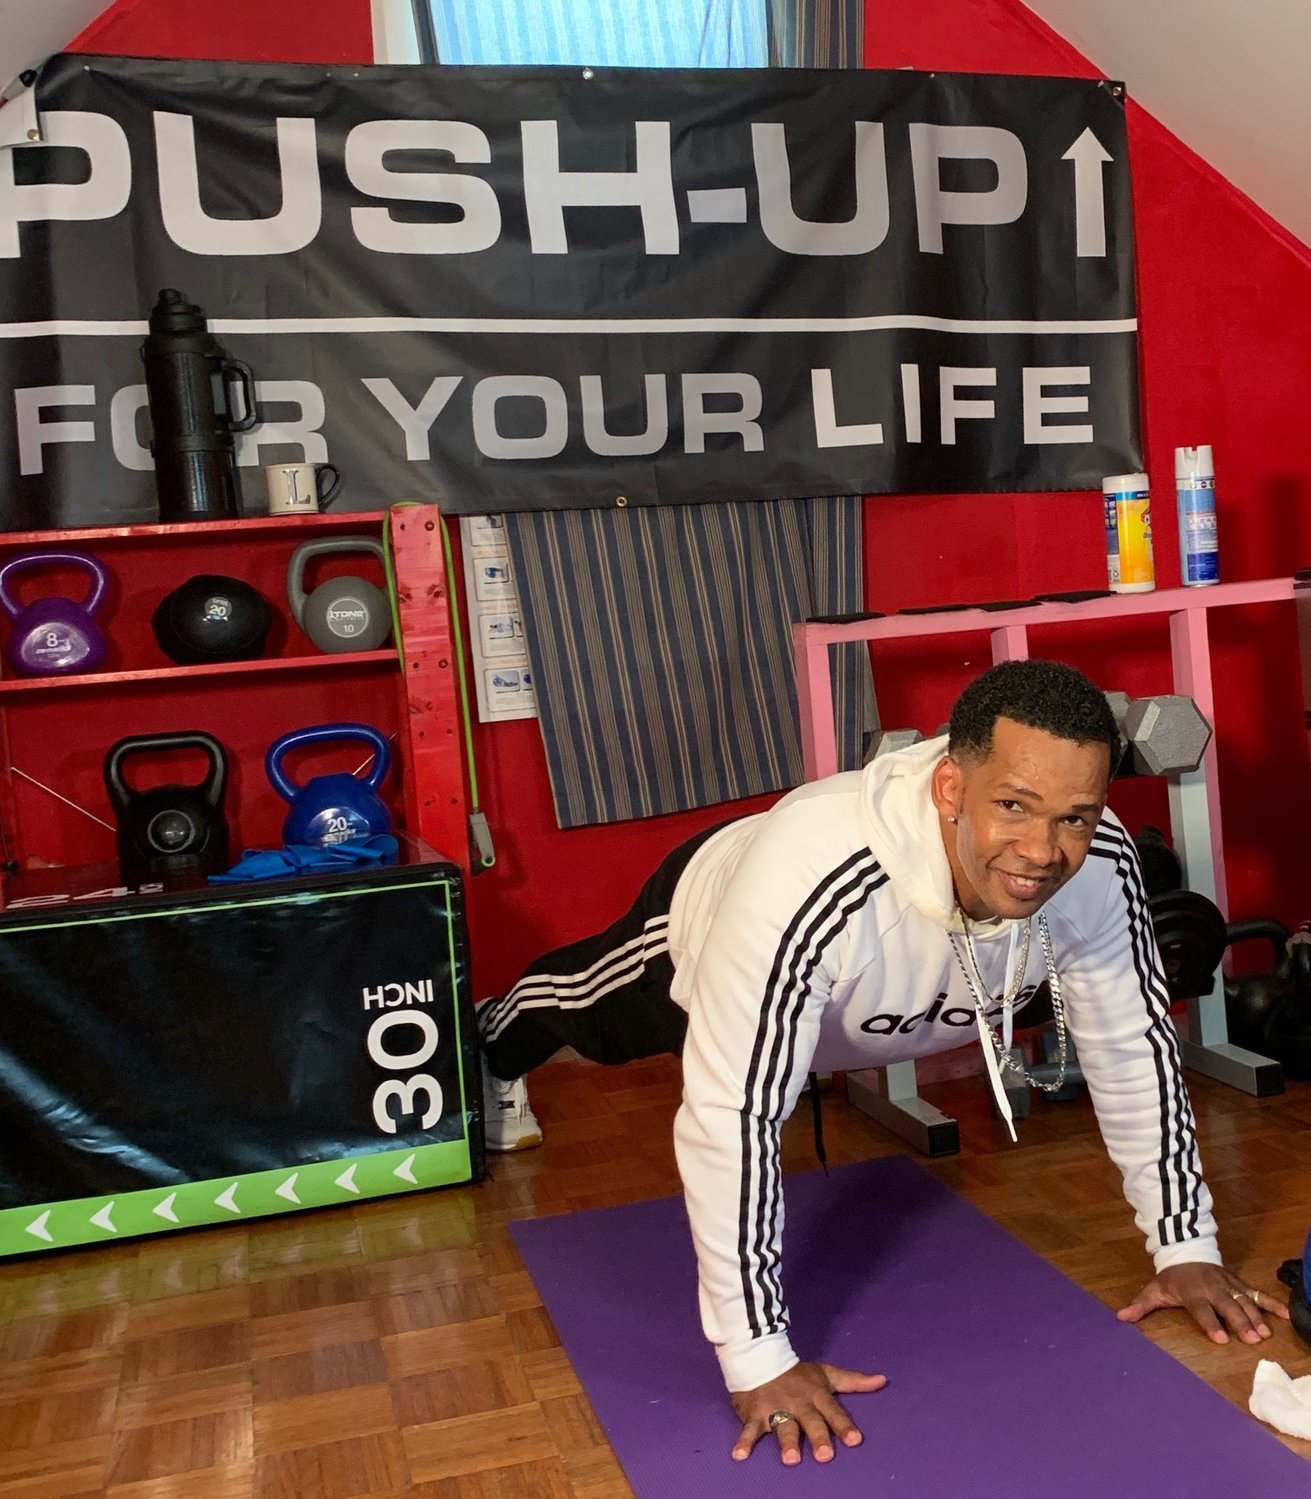 Lancelot Theobald Jr. completed 10,000 push-ups to raise more than $10,000 for the Equal Justice Initiative as part of his Push Up For Your Life campaign.